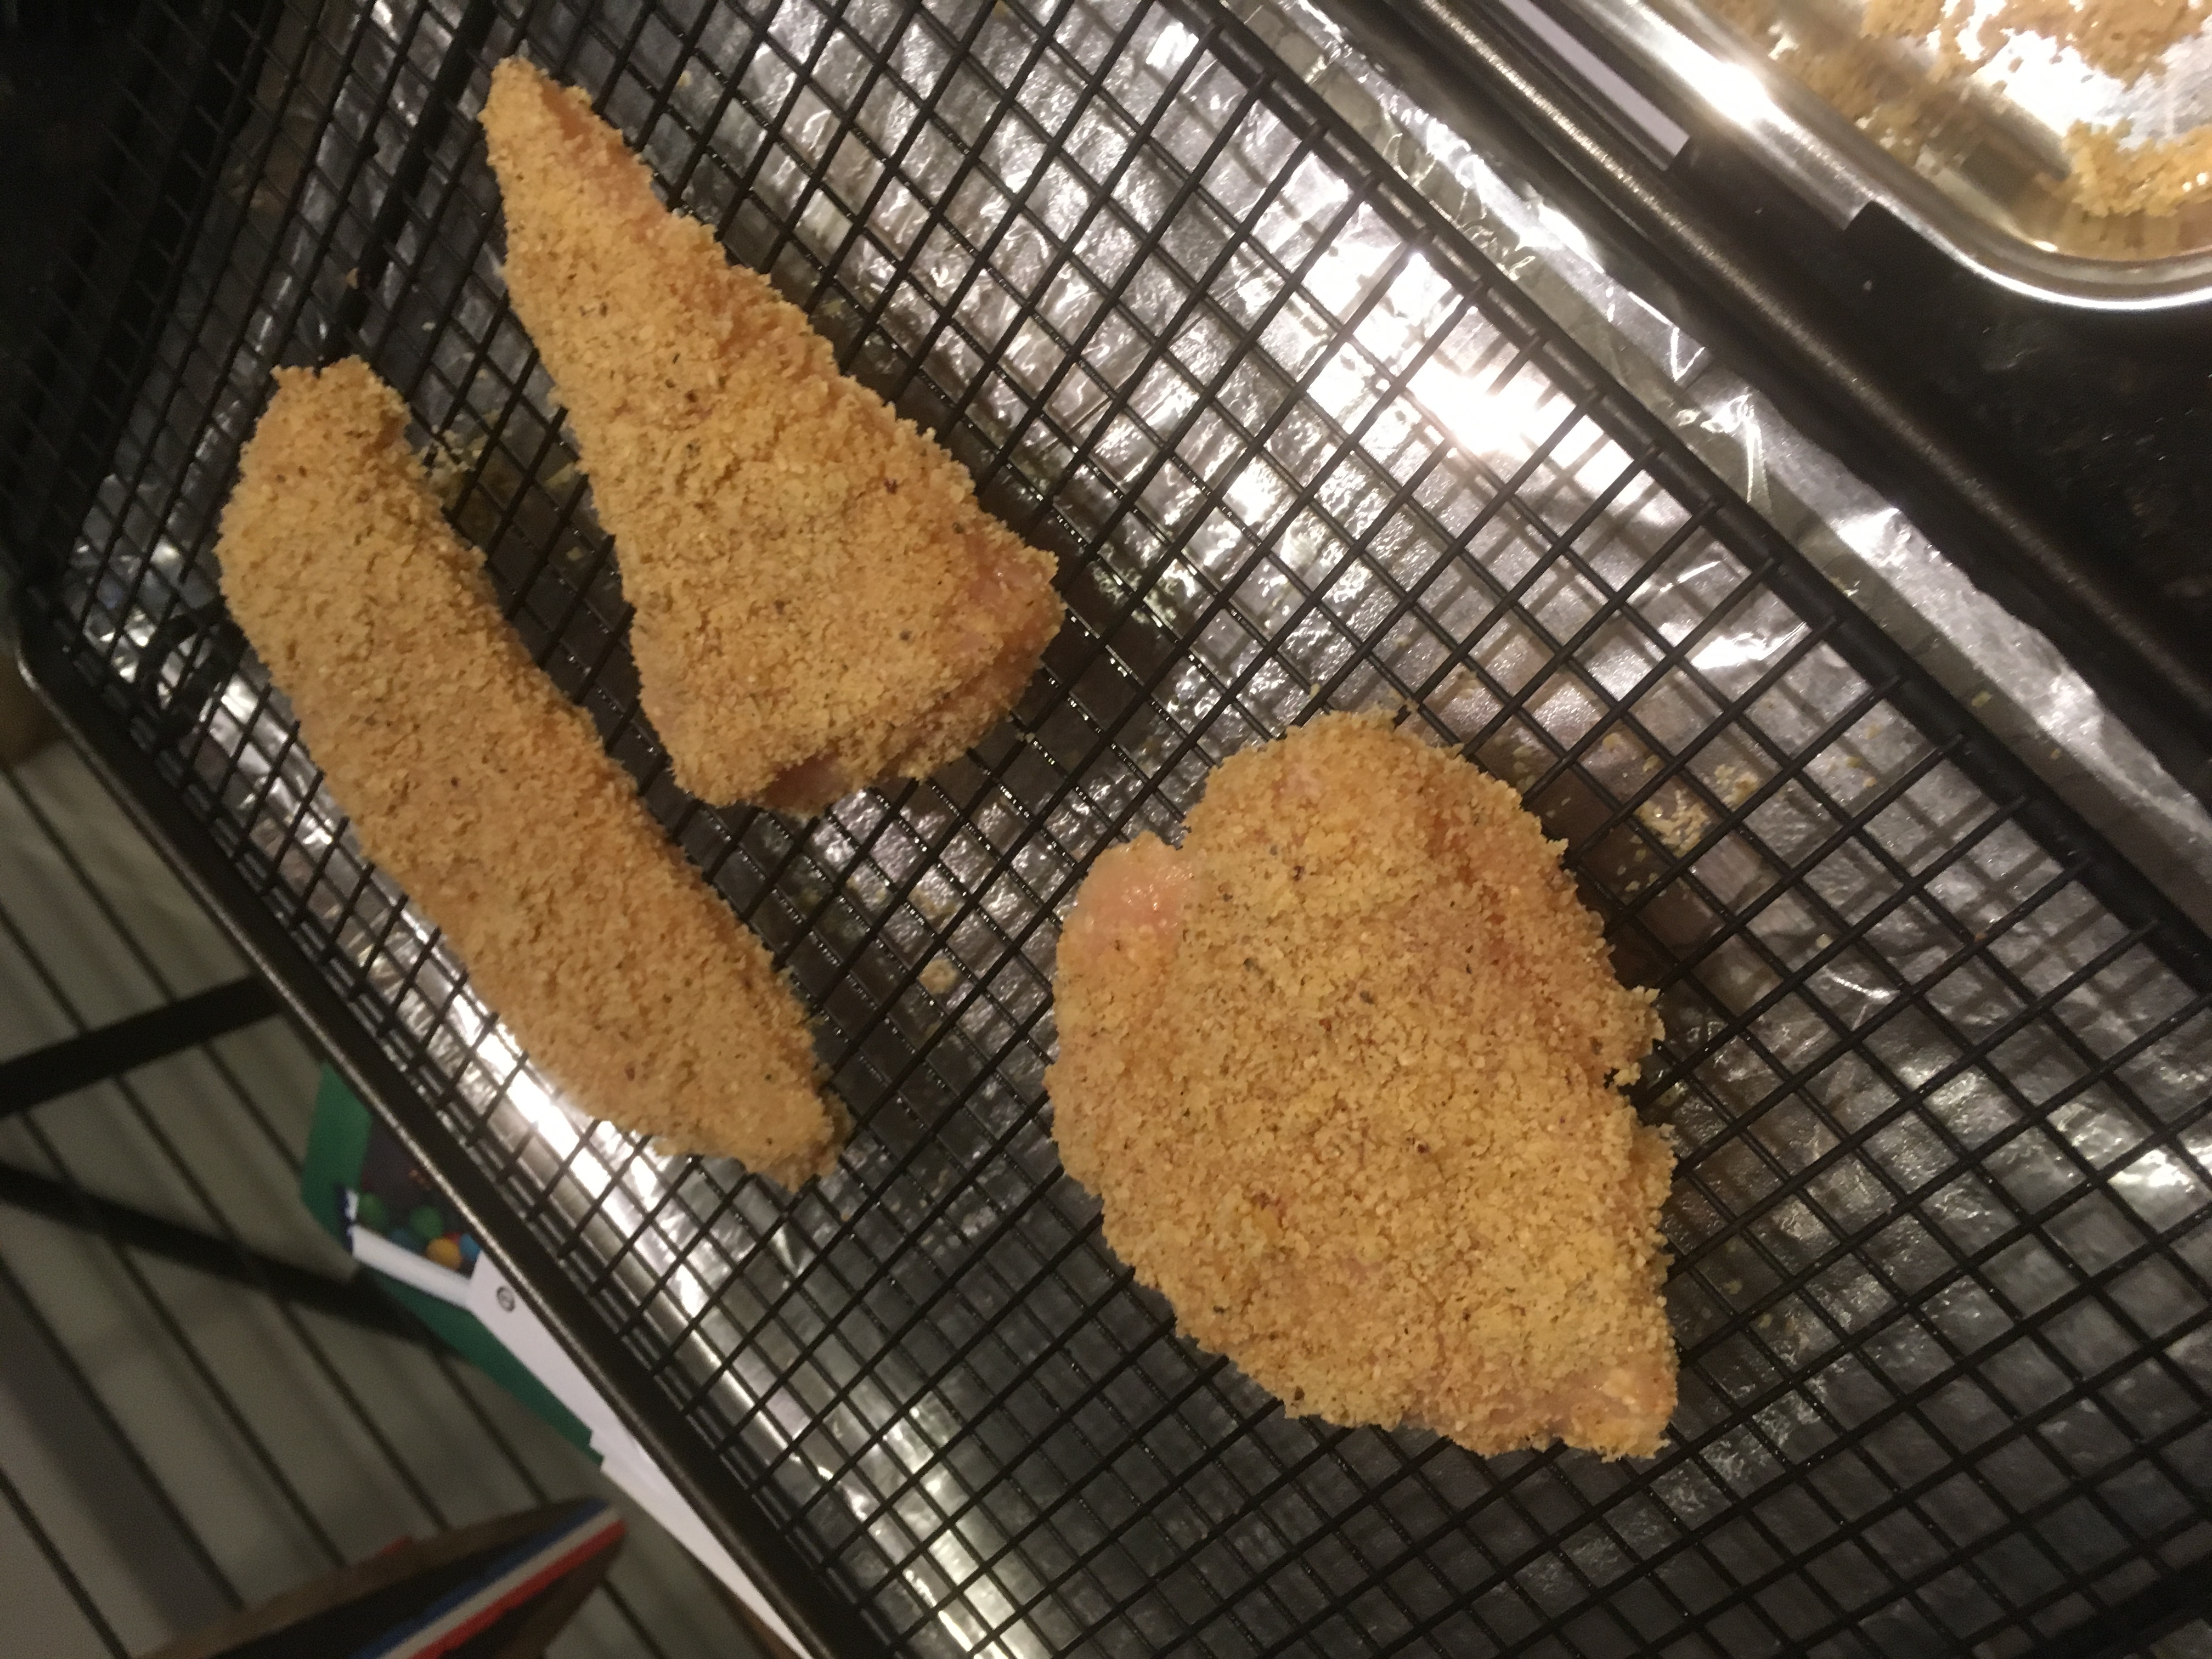 Baked “fried” chicken